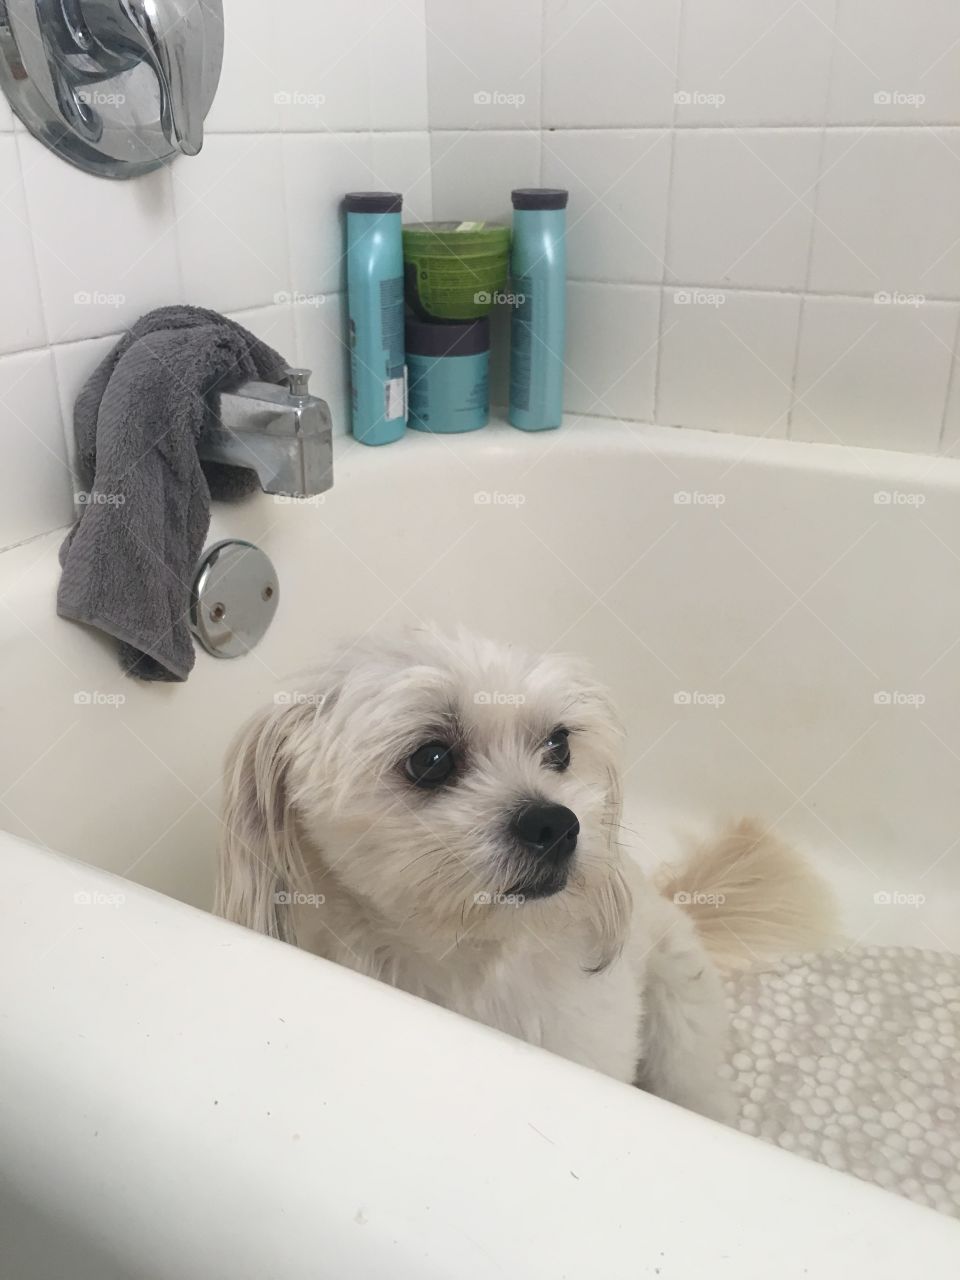 Milo occasionally loves taking a bath but today he most definitely was not looking forward to it. 